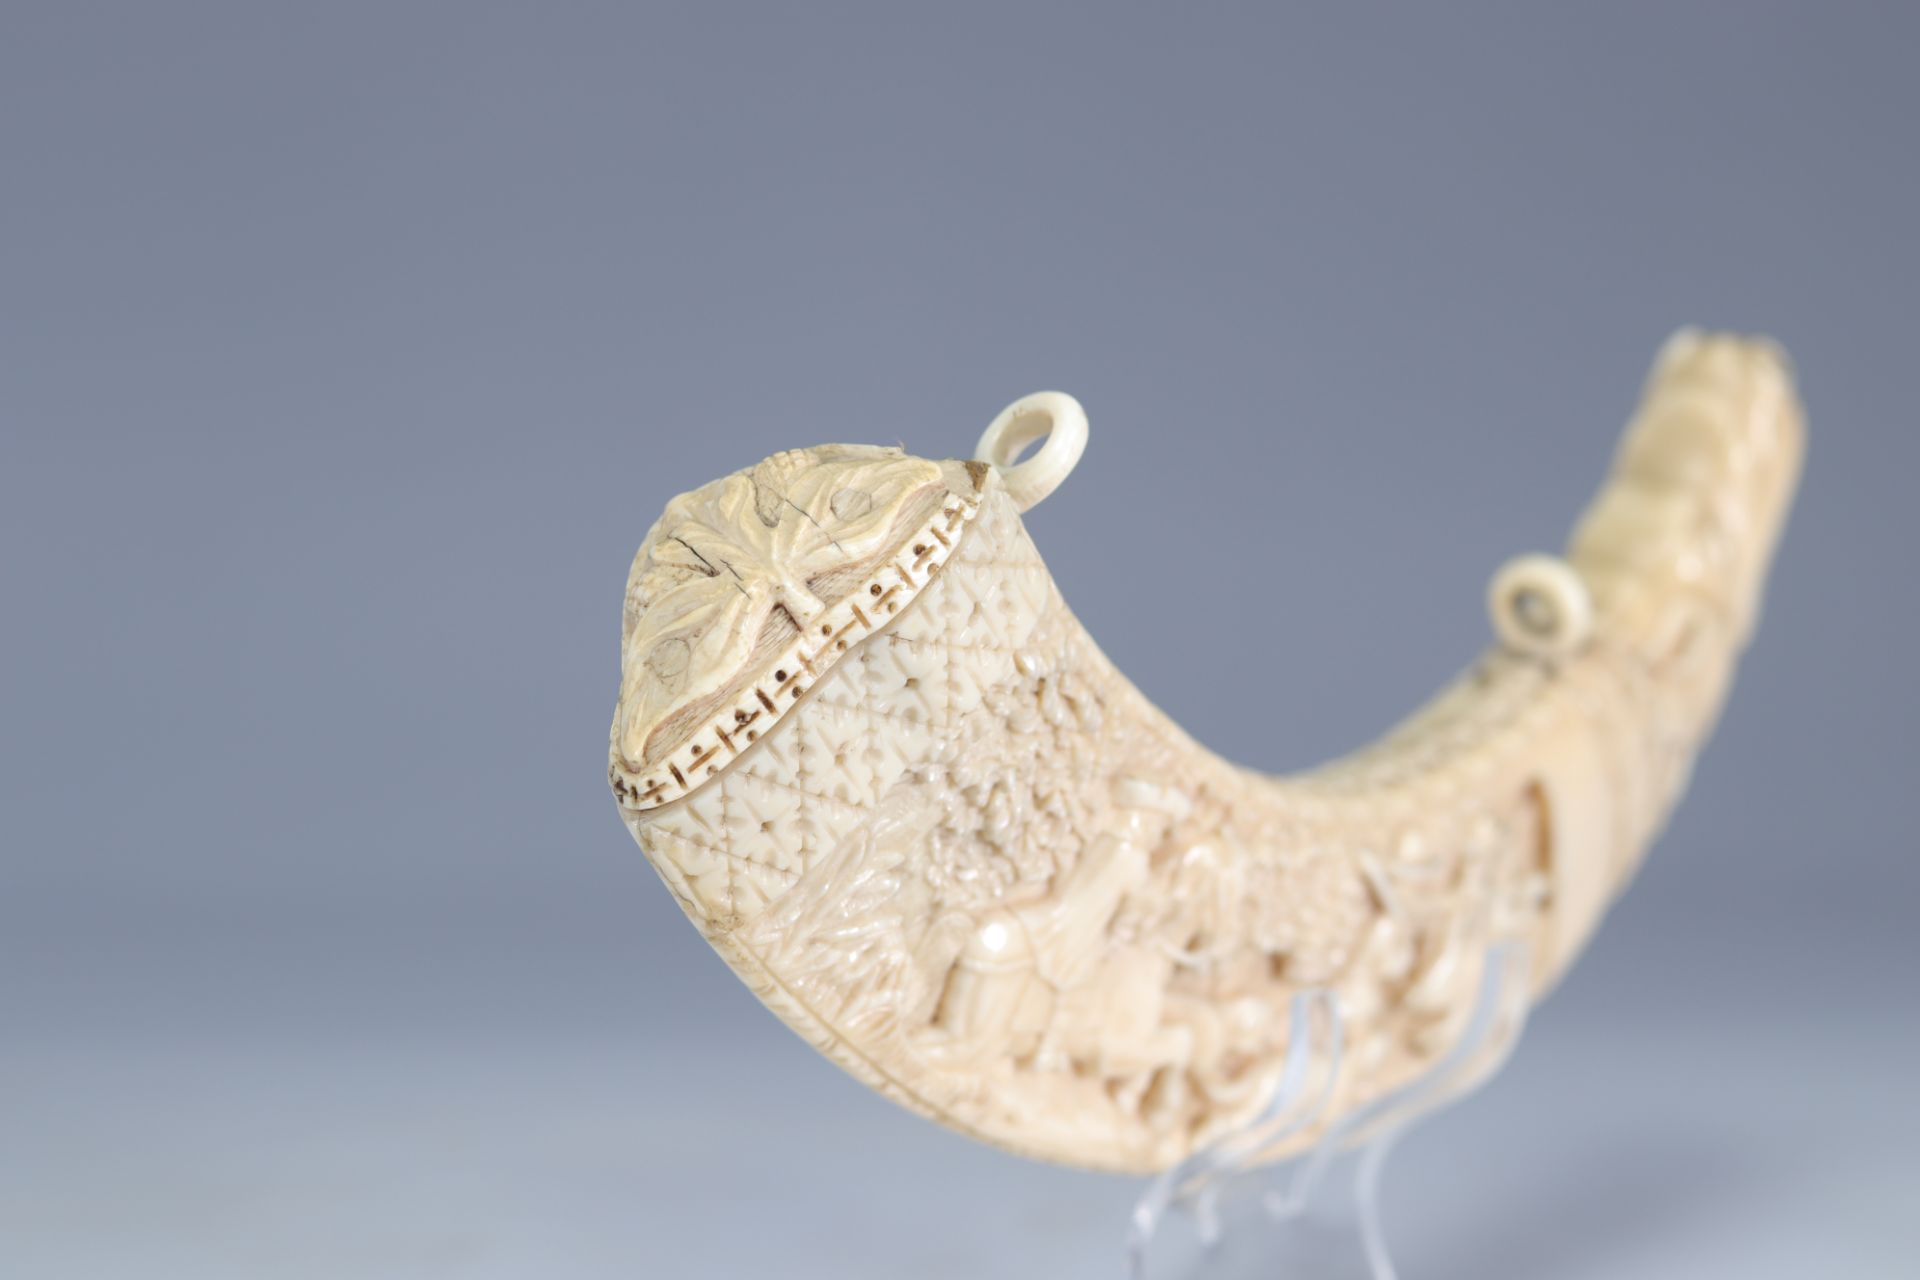 Tooth carved with a 19th century French coat of arms hunting scene - Image 6 of 6